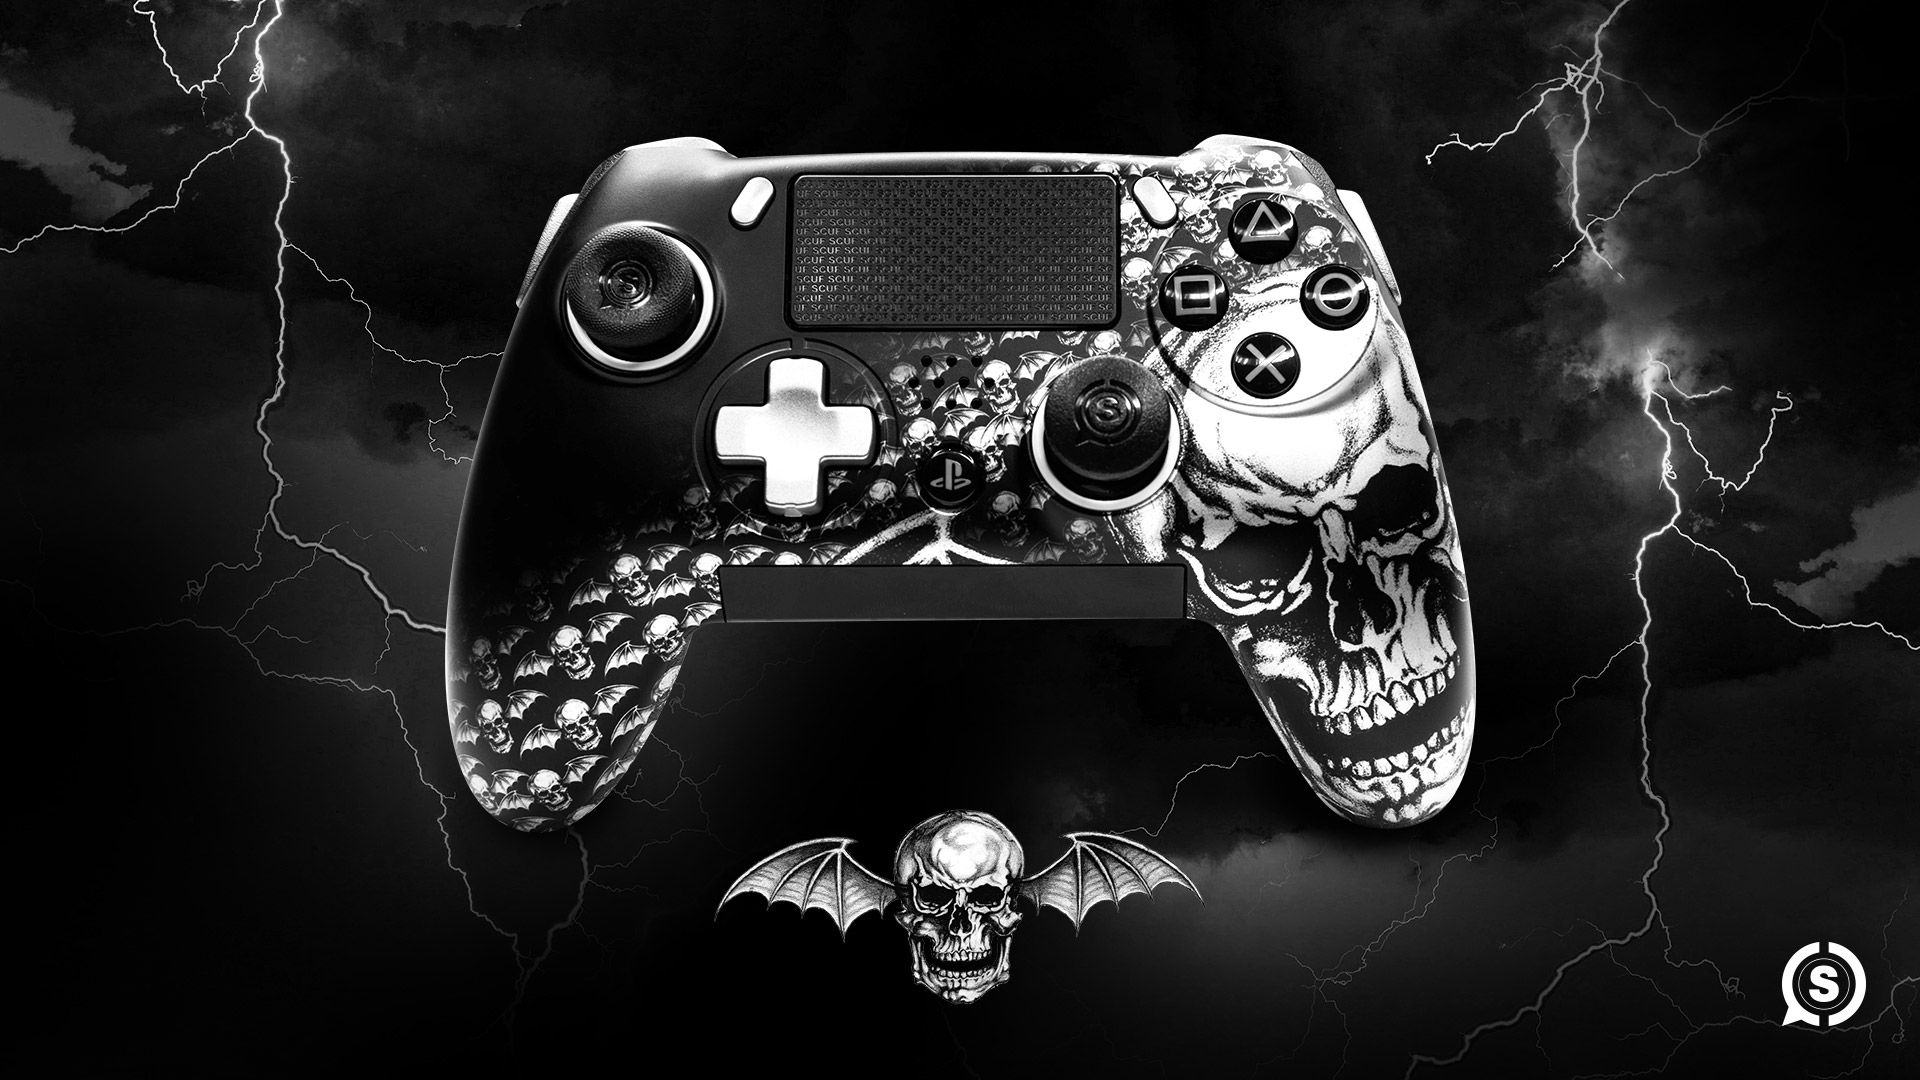 New Avenged Sevenfold Vantage Controller For PS4 Announced By SCUF